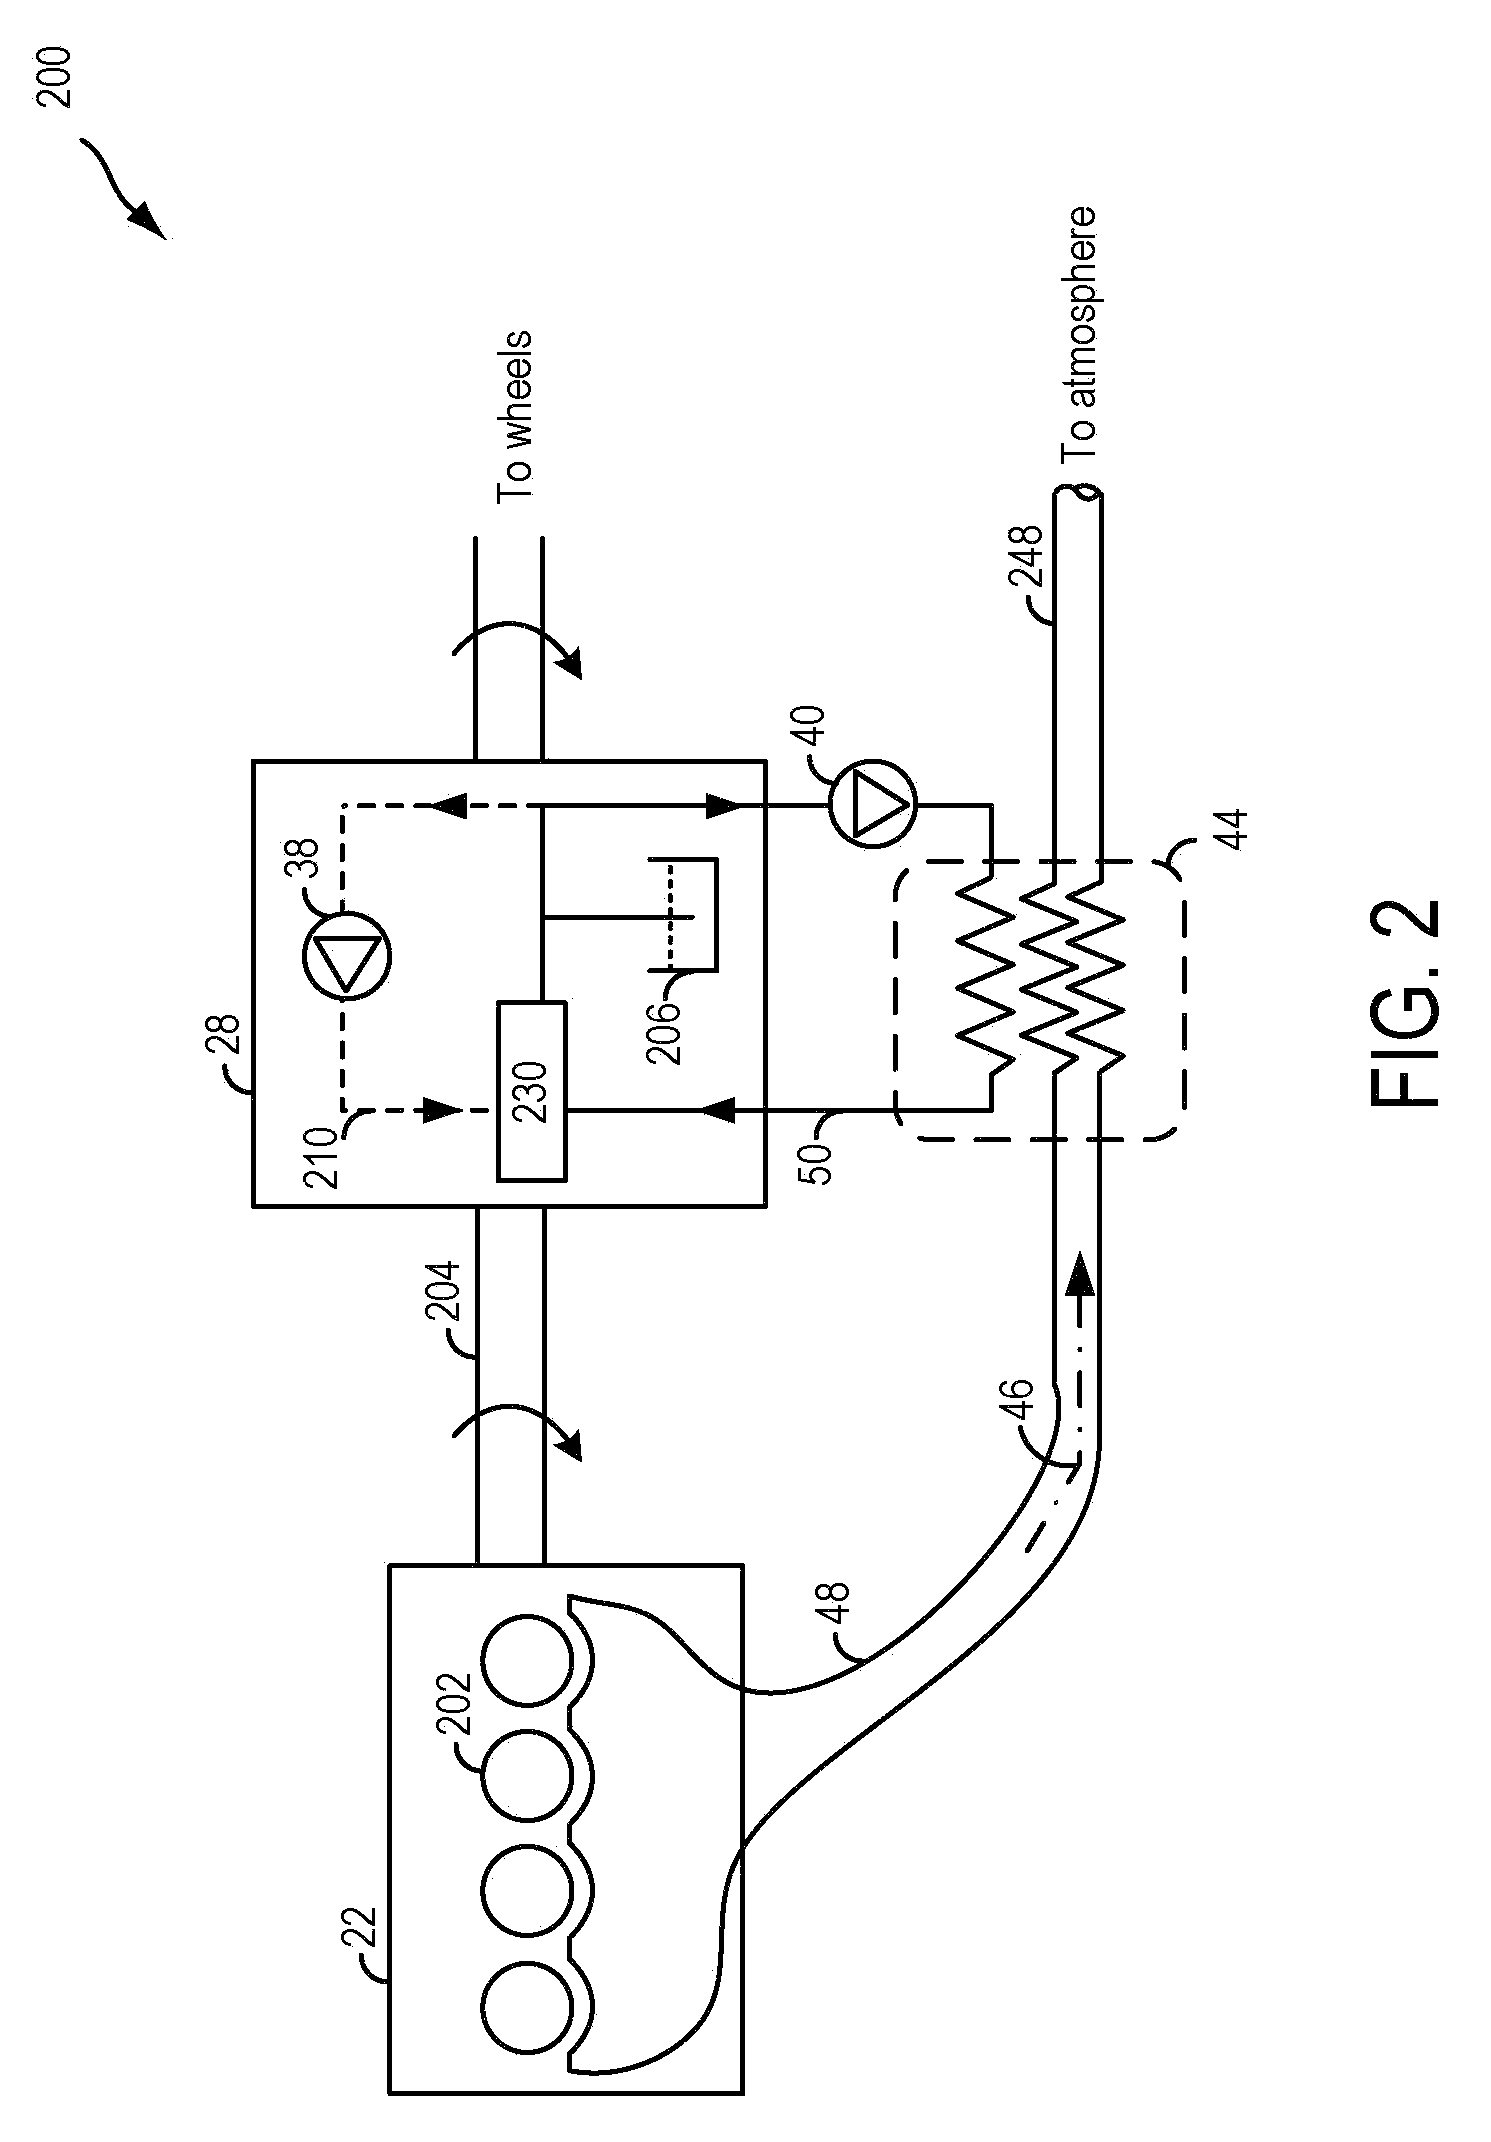 Methods and systems for heating transmission fluid